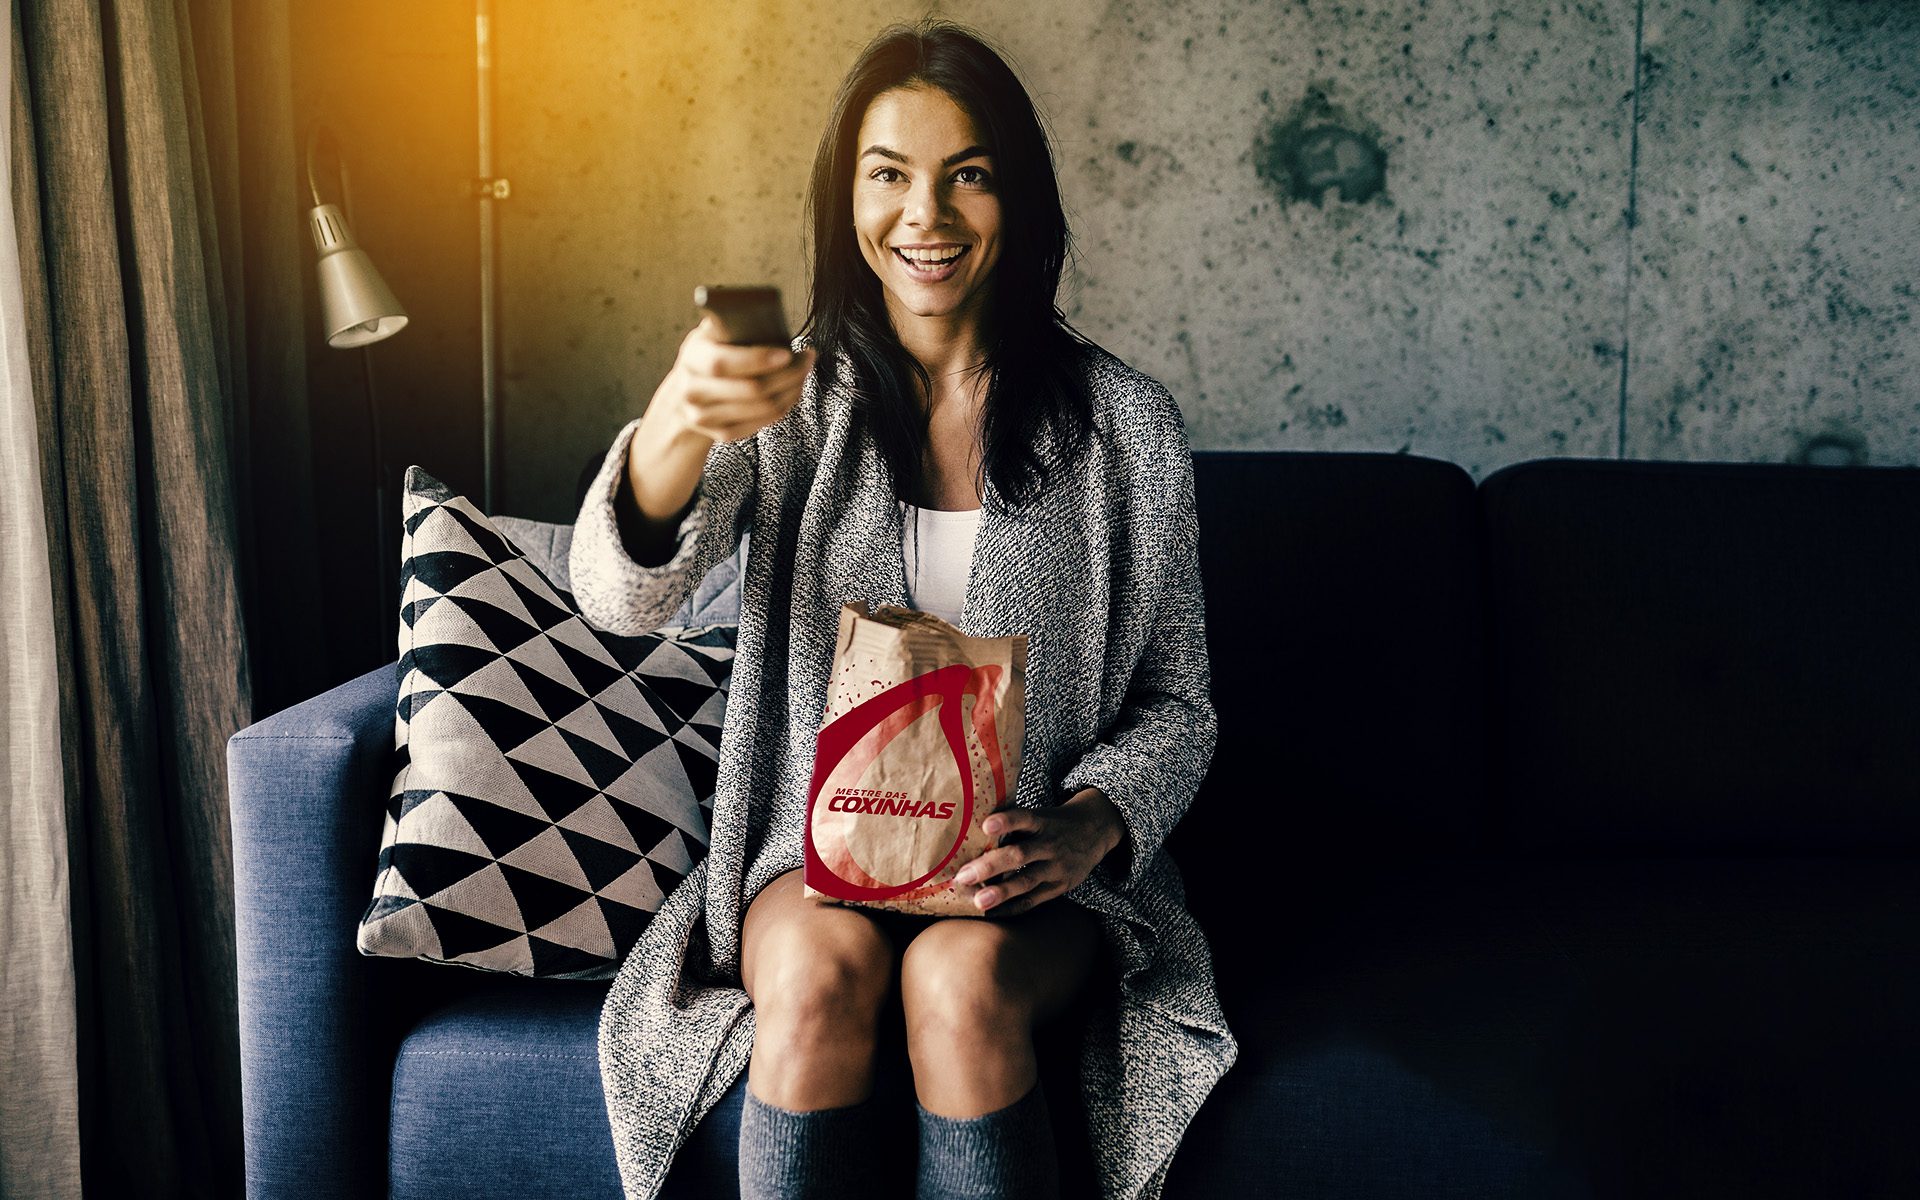 young attractive woman in casual outfit relaxing at home watching movies on tv holding remote control, switching channels, eating popcorn, leisure, having fun, smiling sitting on sofa, cheerful, happy